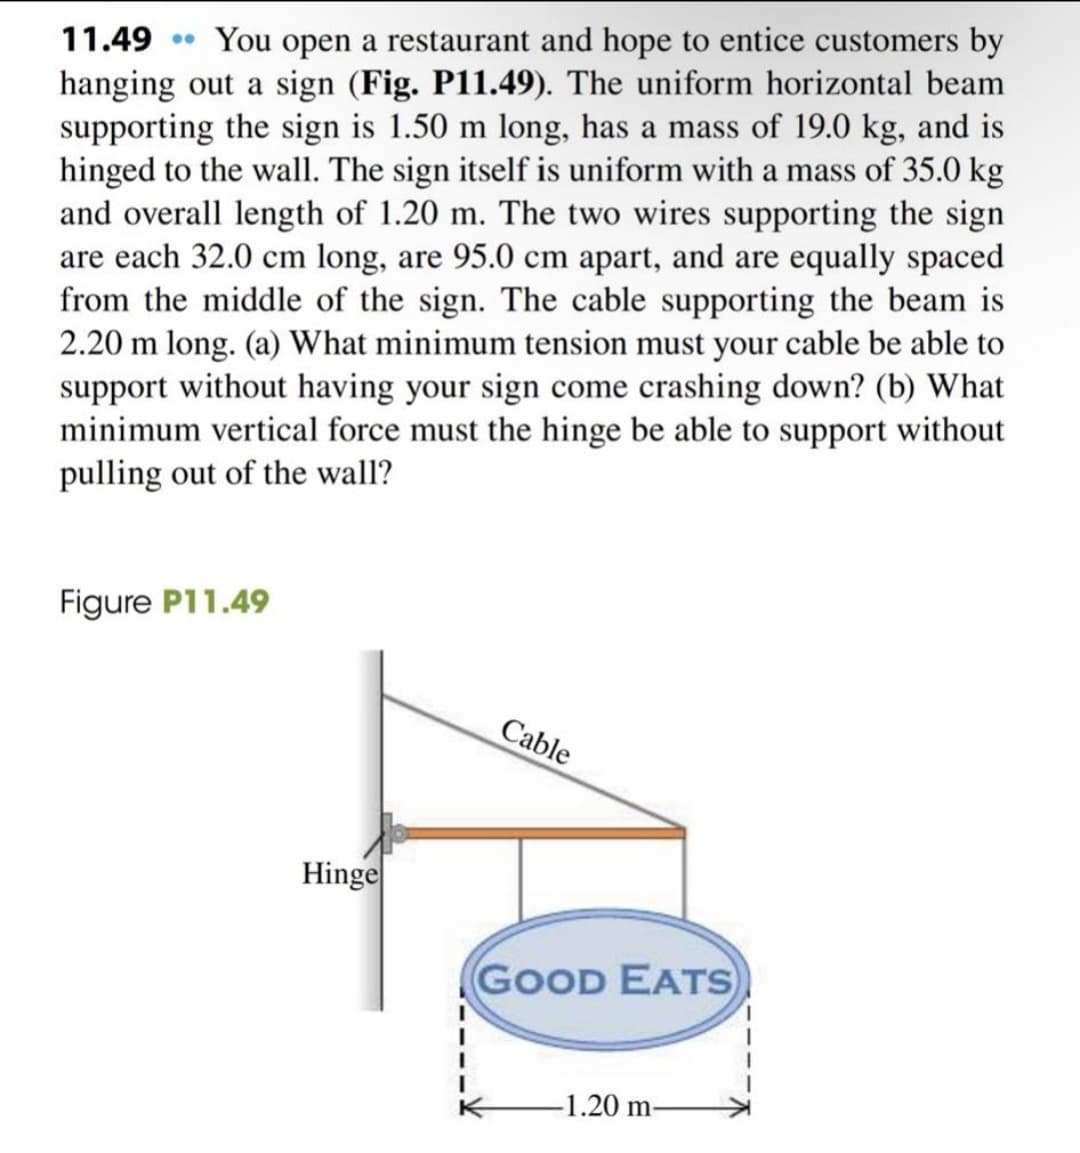 11.49 • You open a restaurant and hope to entice customers by
hanging out a sign (Fig. P11.49). The uniform horizontal beam
supporting the sign is 1.50 m long, has a mass of 19.0 kg, and is
hinged to the wall. The sign itself is uniform with a mass of 35.0 kg
and overall length of 1.20 m. The two wires supporting the sign
are each 32.0 cm long, are 95.0 cm apart, and are equally spaced
from the middle of the sign. The cable supporting the beam is
2.20 m long. (a) What minimum tension must your cable be able to
support without having your sign come crashing down? (b) What
minimum vertical force must the hinge be able to support without
pulling out of the wall?
Figure P11.49
Cable
Hinge
GOOD EATS
-1.20 m-
